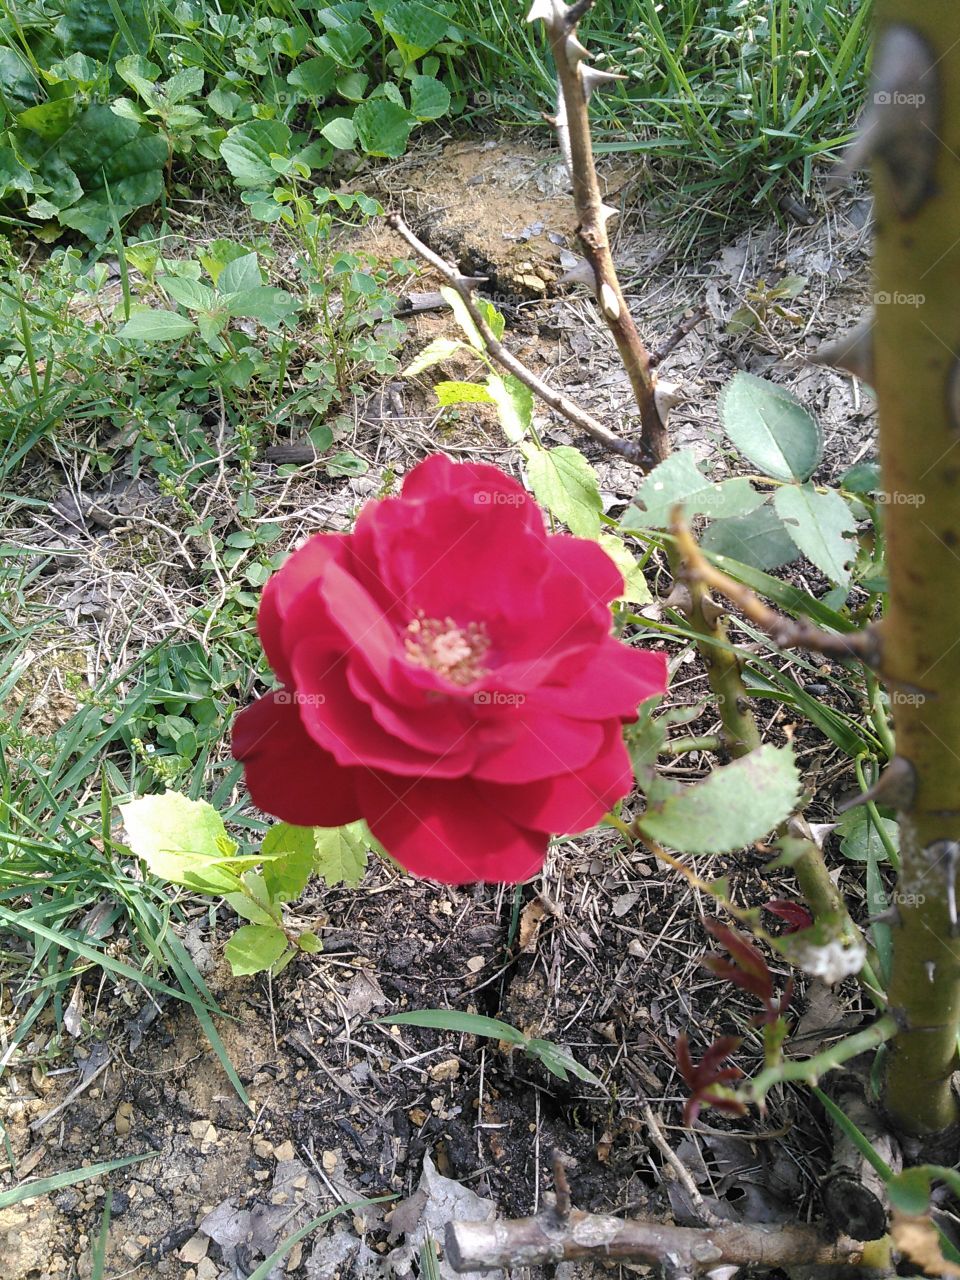 "First Bloom"
I planted this rose bush last year and it finally bloomed a bright red blossom.